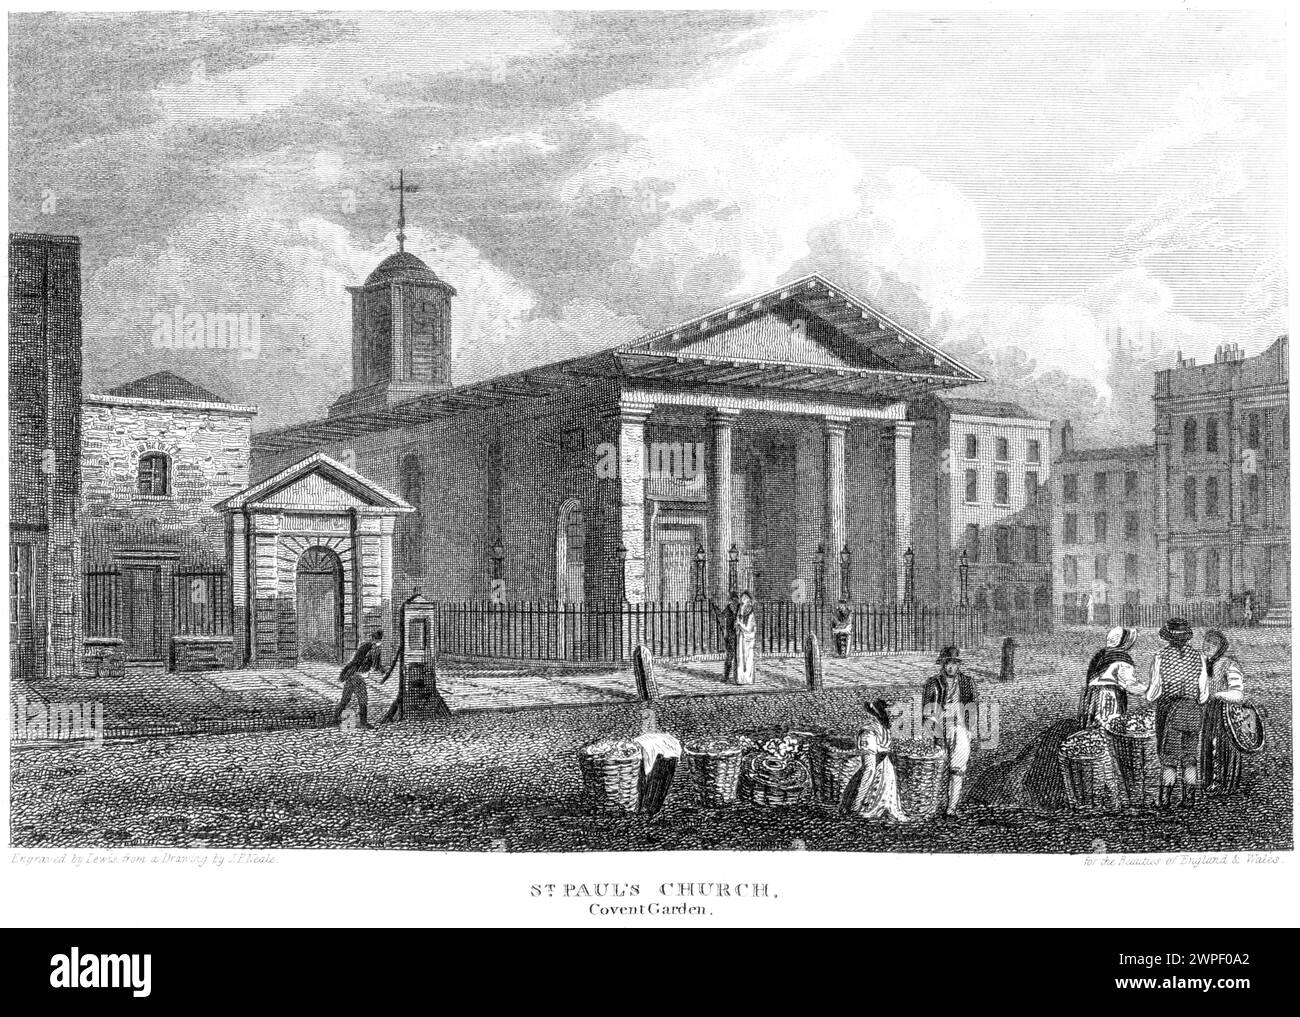 An engraving entitled St Pauls Church, Covent Garden, London UK scanned at high resolution from a book published around 1815. Stock Photo